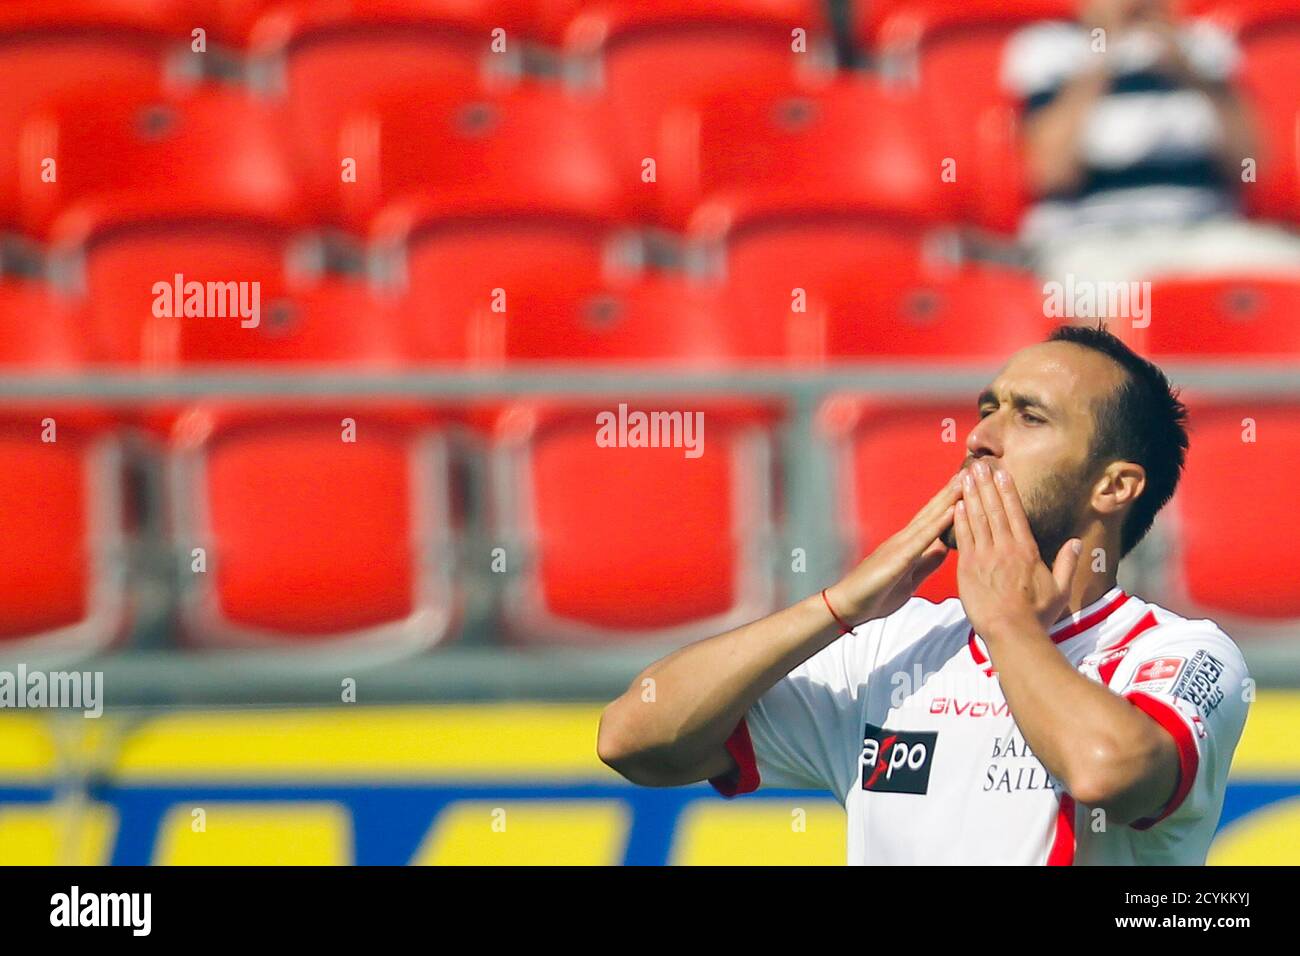 FC Sion's Dragan Mrdja celebrates his goal during his Swiss Super League  promotion and relegation soccer match against FC Aarau in Sion, May 26,  2012. REUTERS/Valentin Flauraud (SWITZERLAND - Tags: SPORT SOCCER